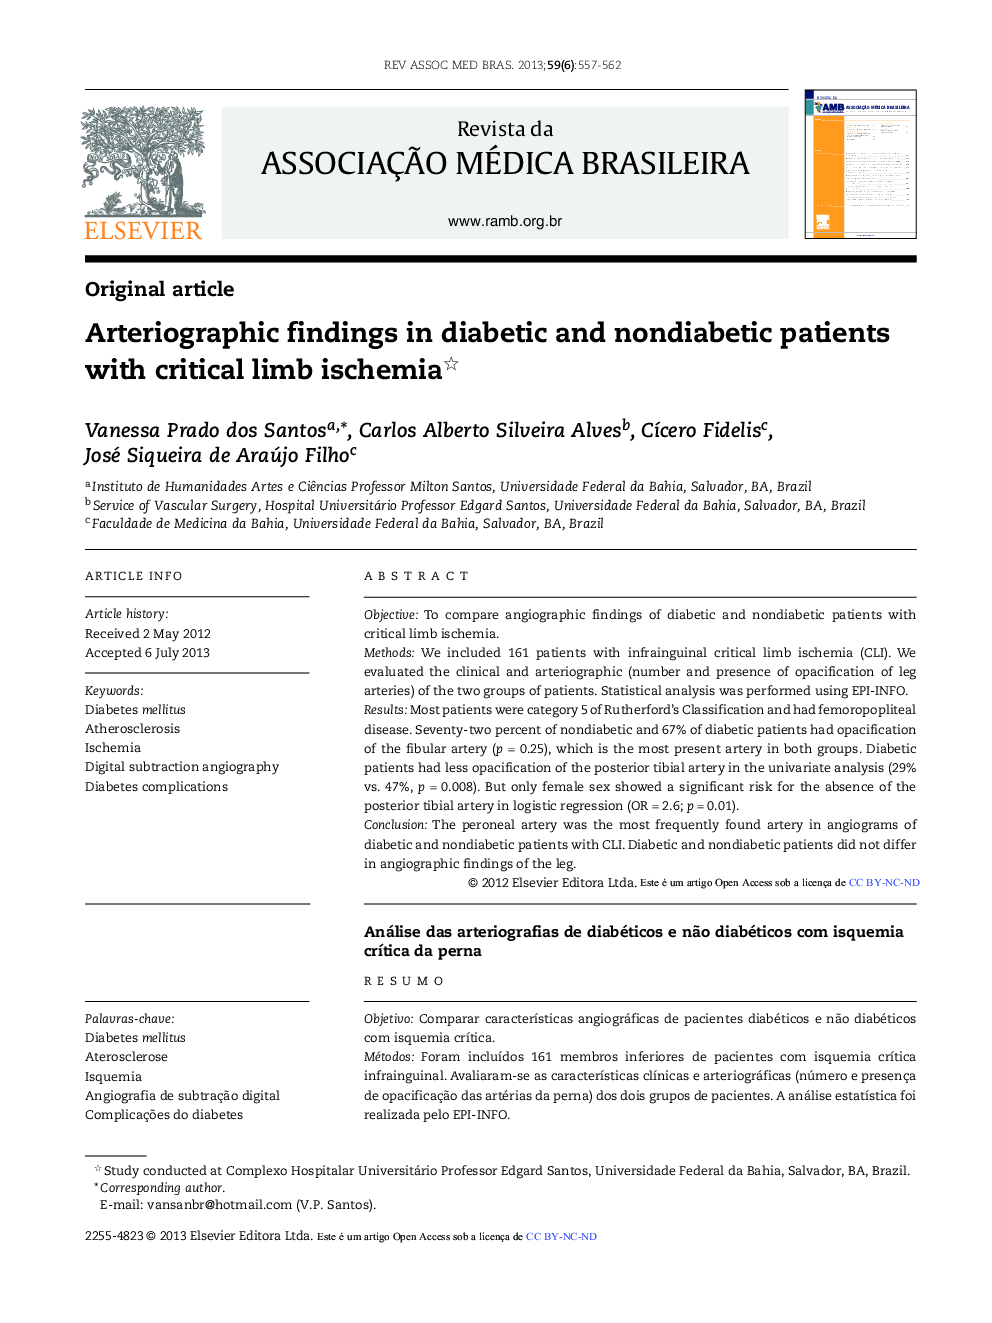 Arteriographic findings in diabetic and nondiabetic patients with critical limb ischemia *